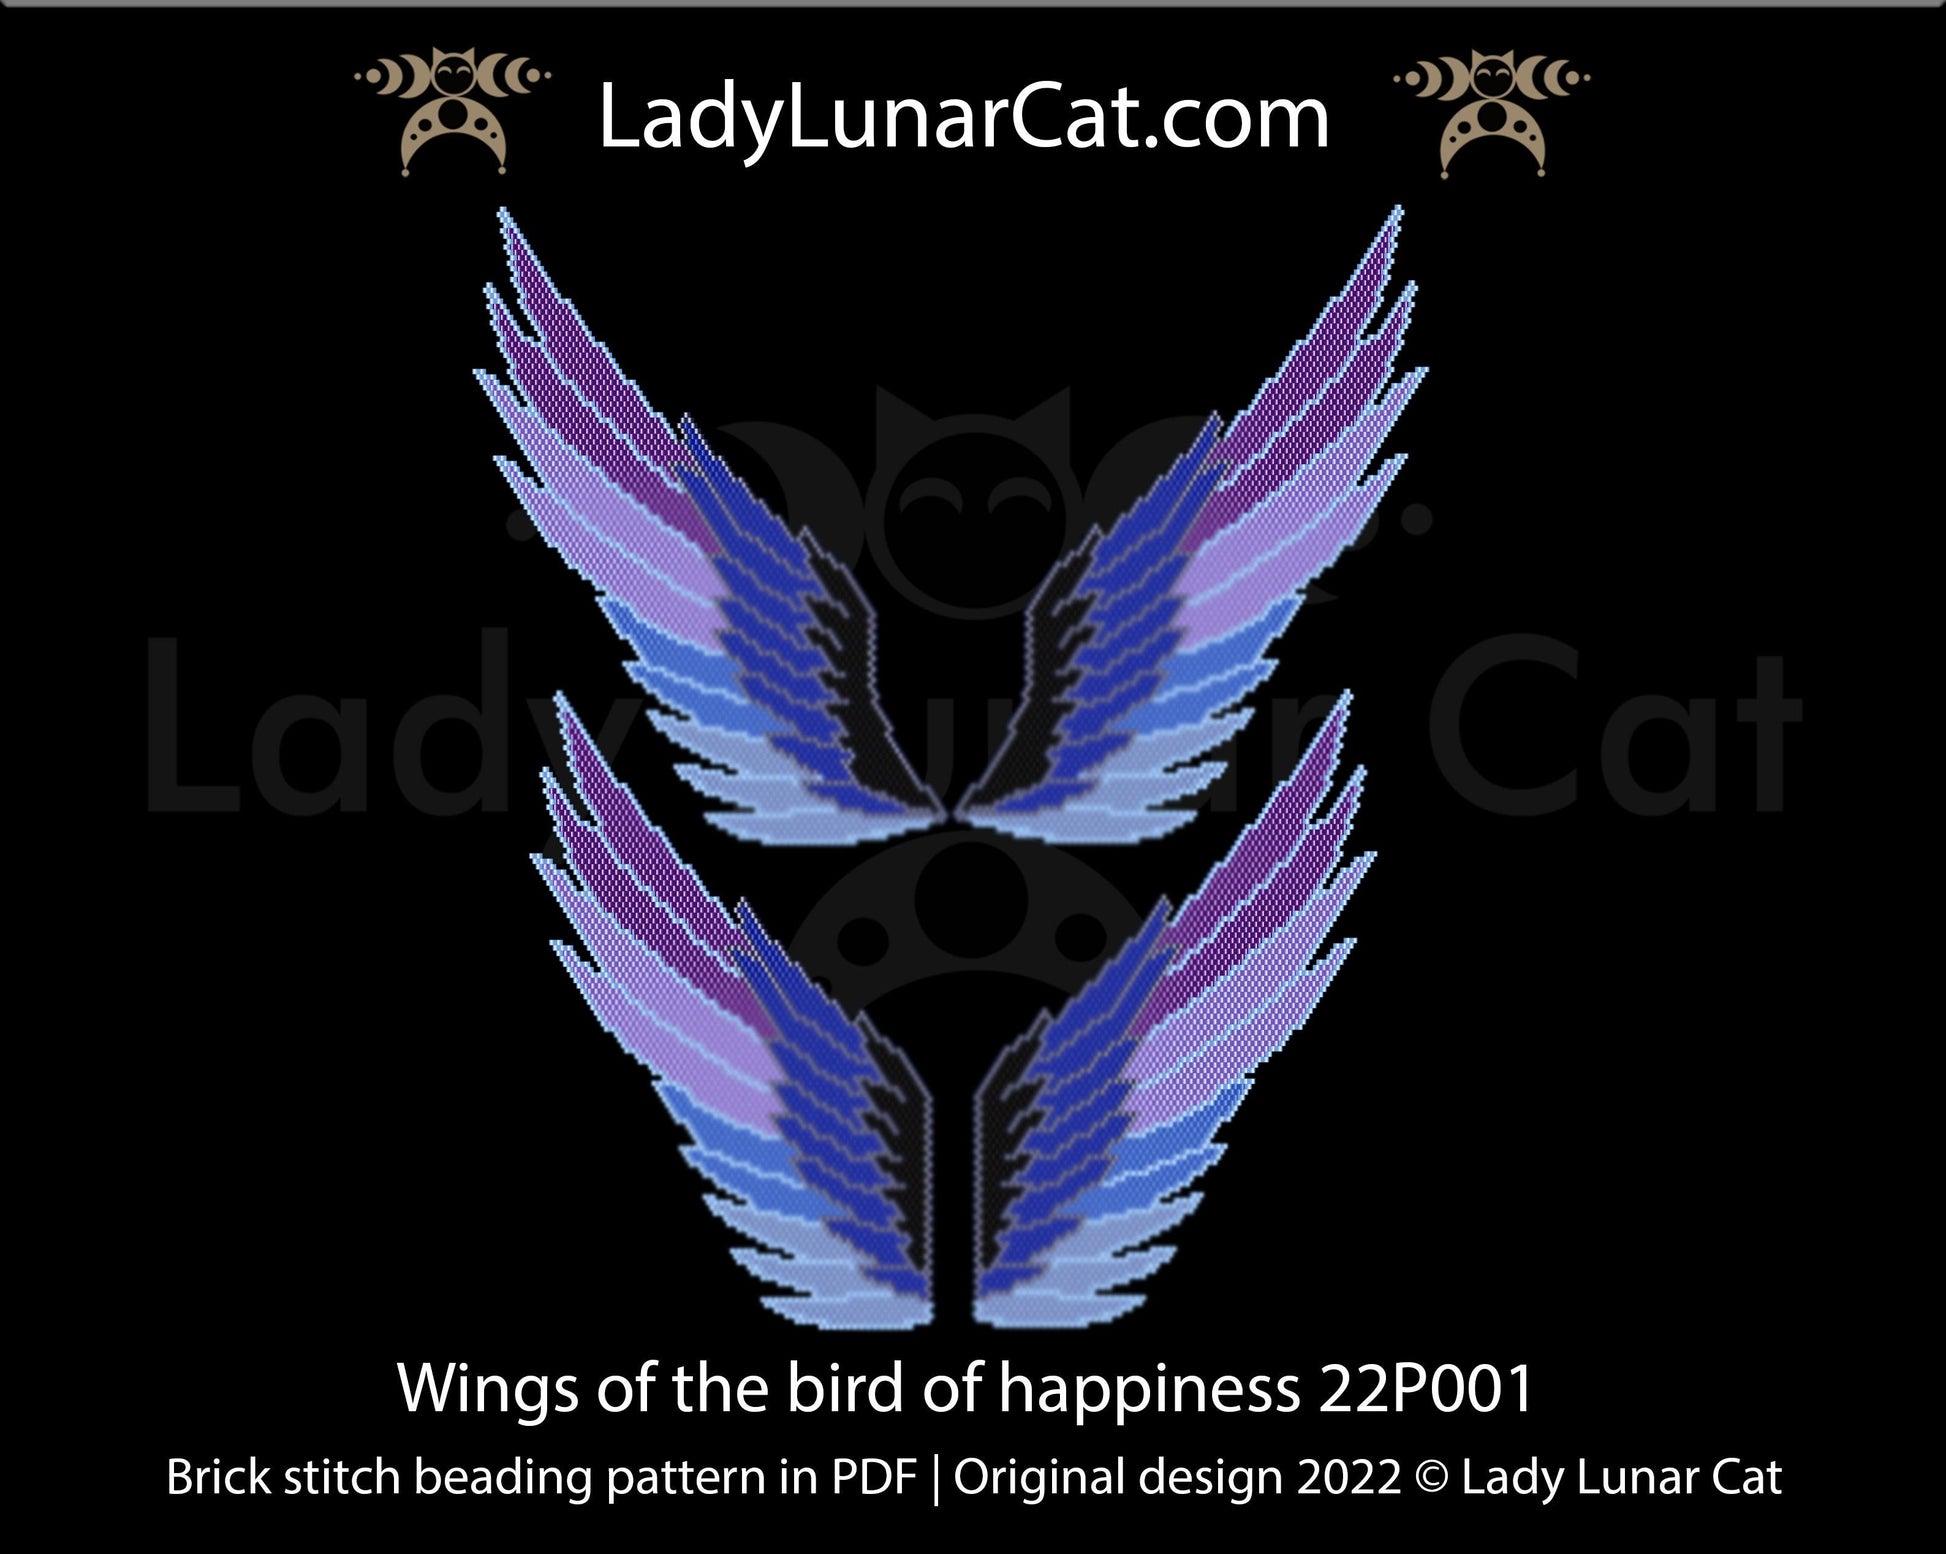 Brick stitch pattern for beading Wings of the bird of happiness 22P001 LadyLunarCat